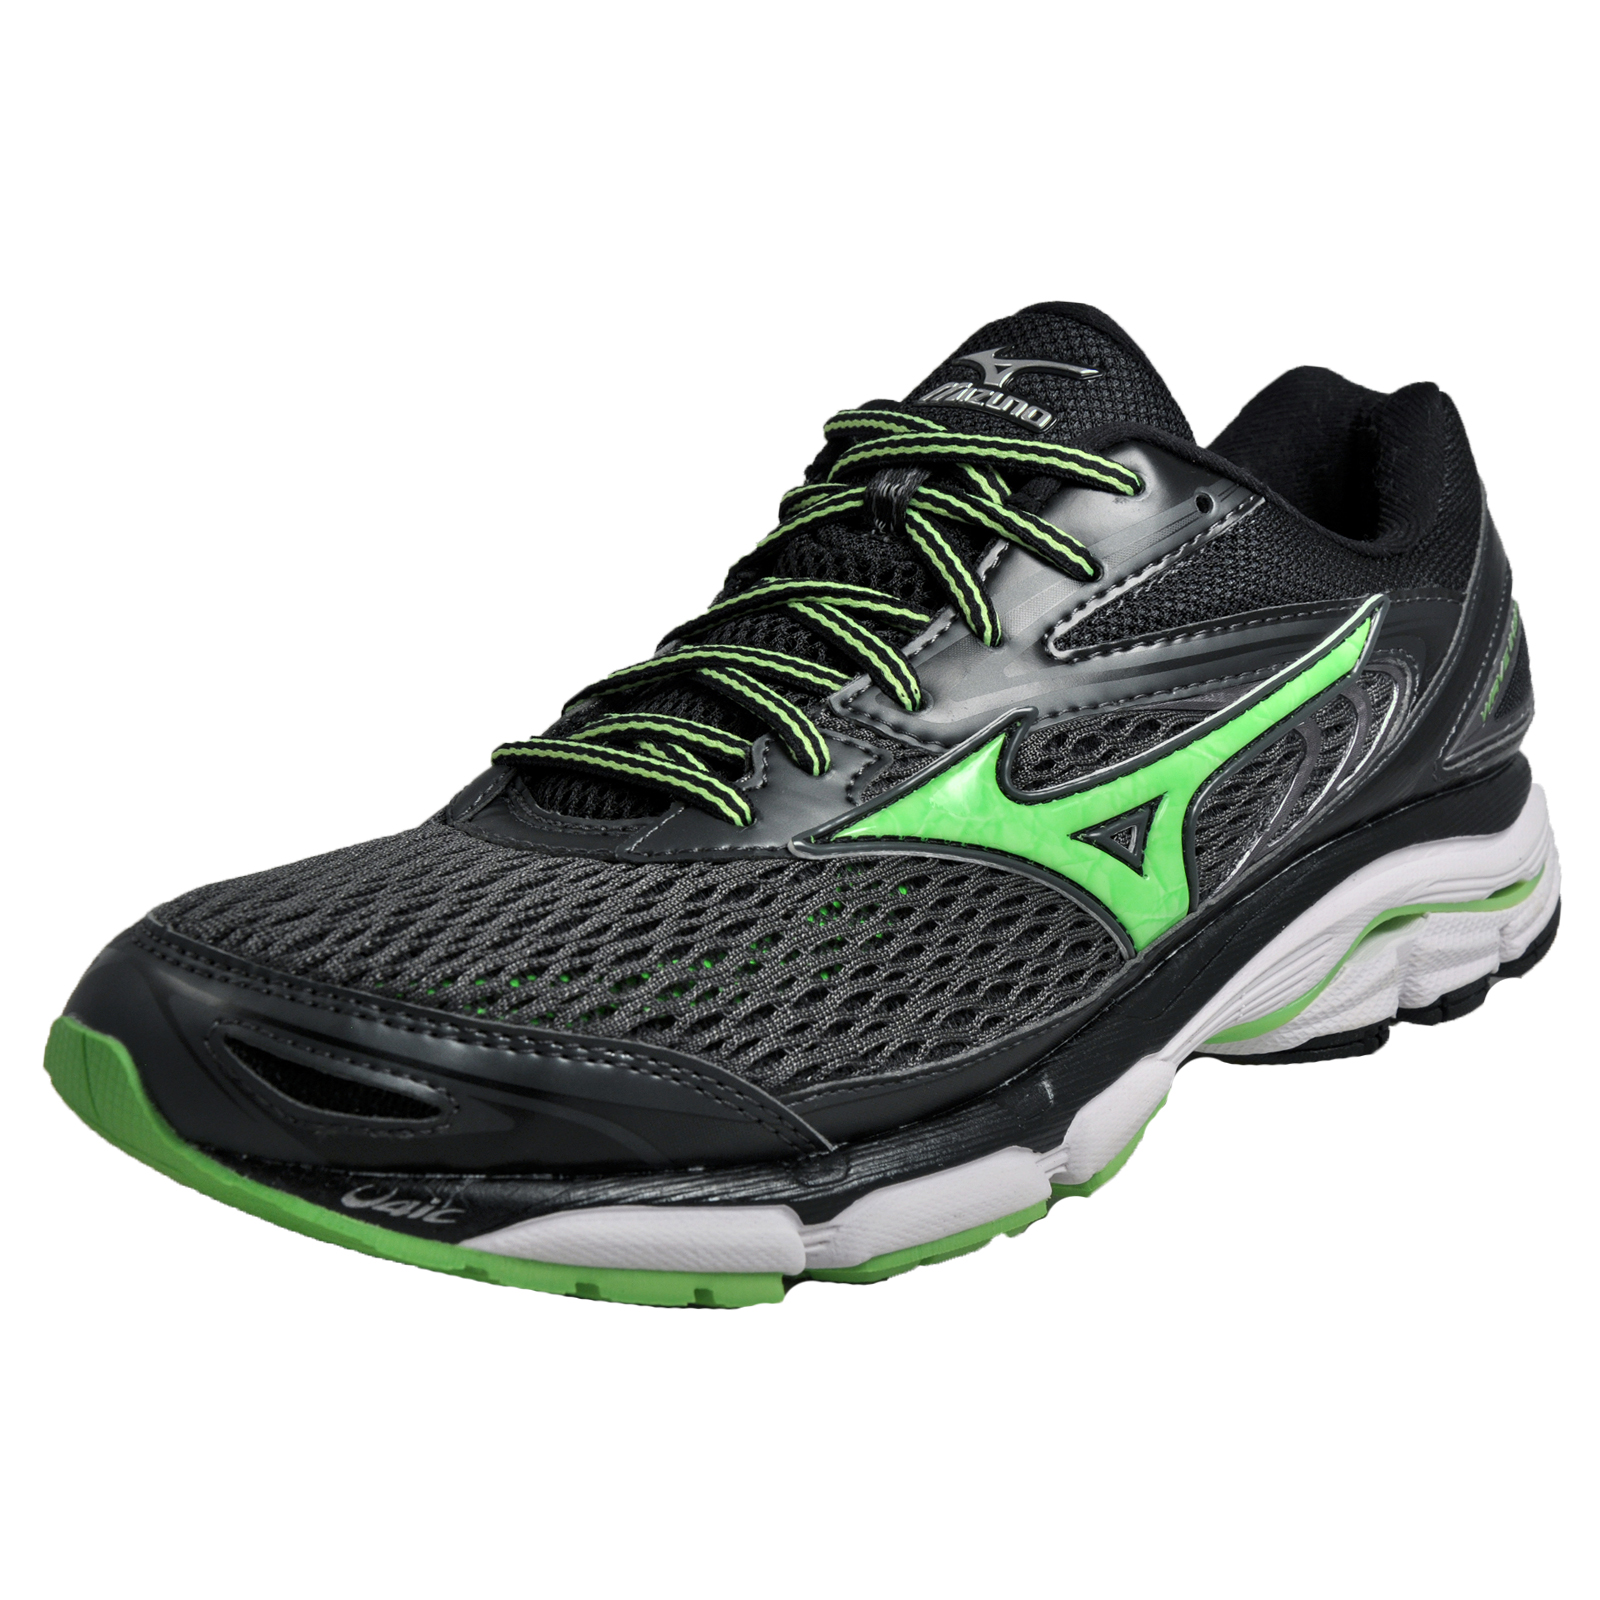 Mizuno Wave Inspire 13 Mens Running Shoes Fitness Gym Trainers Black | eBay